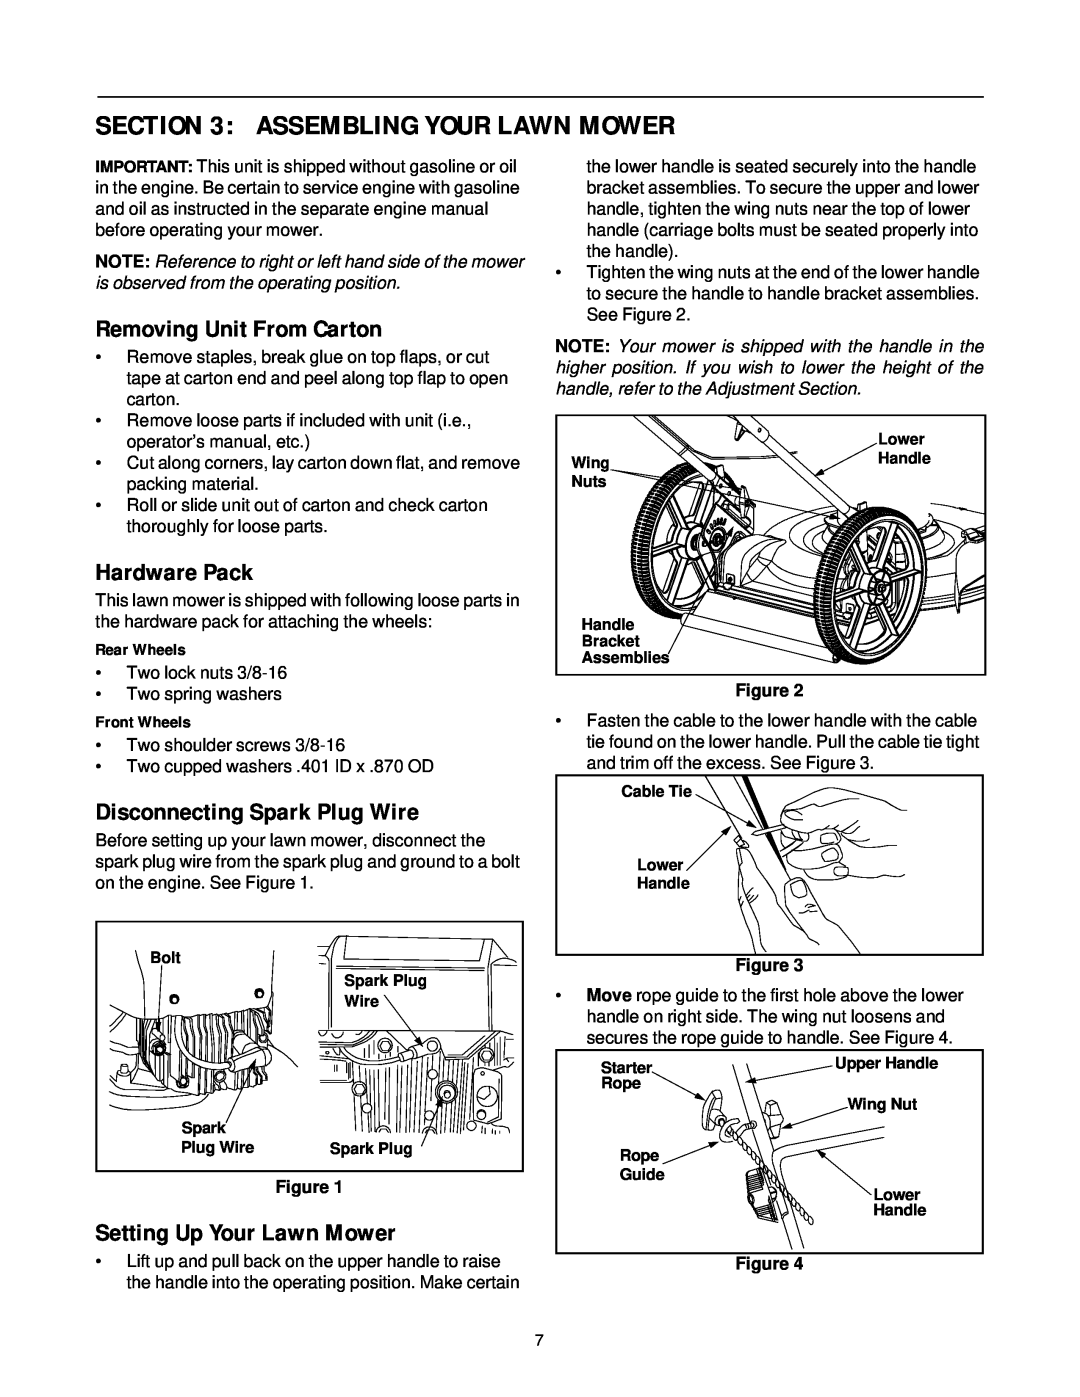 MTD 500 Thru 519 manual Assembling Your Lawn Mower, Removing Unit From Carton, Hardware Pack, Disconnecting Spark Plug Wire 